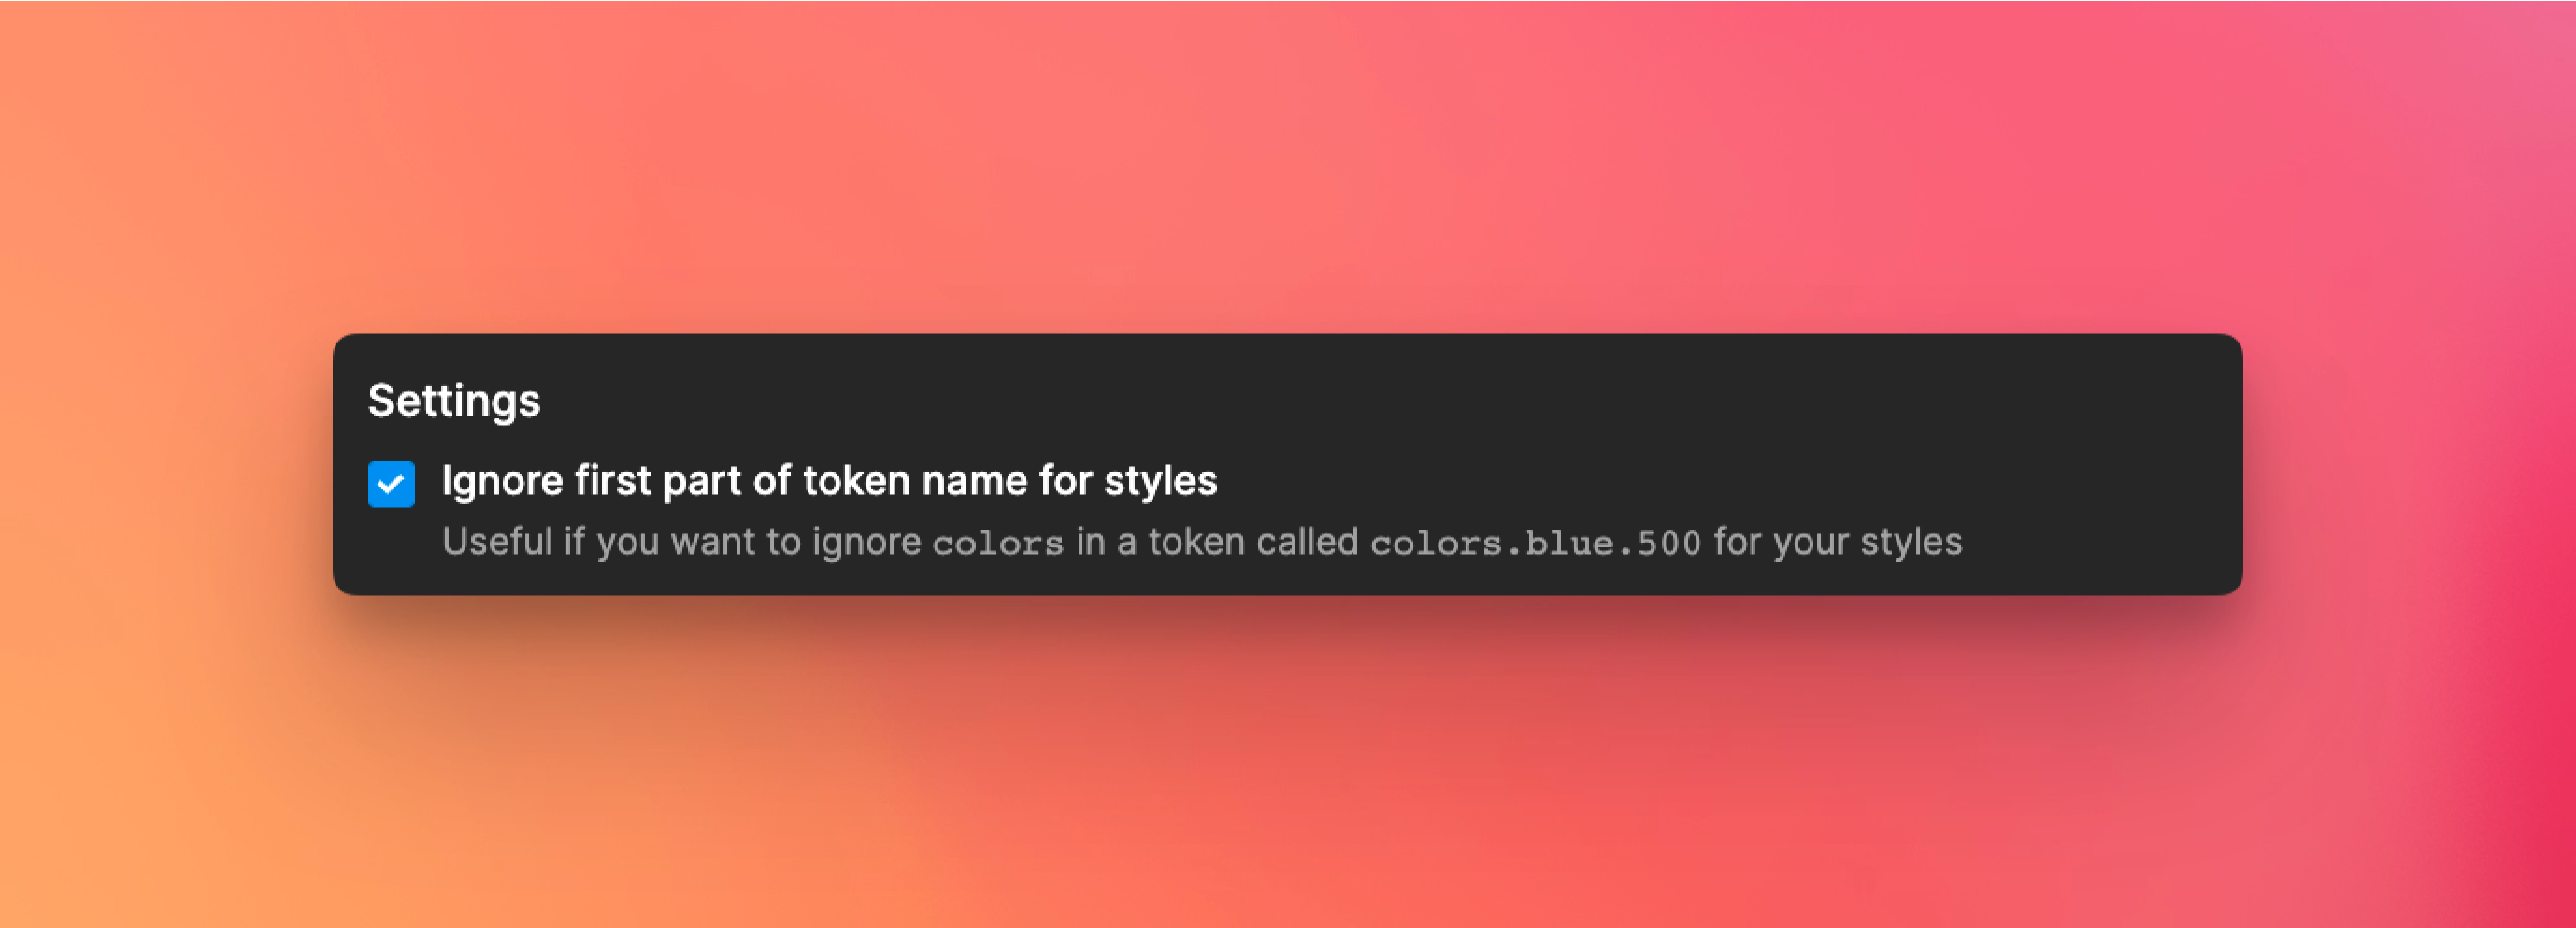 Ignore first part of token name for styles - step 1